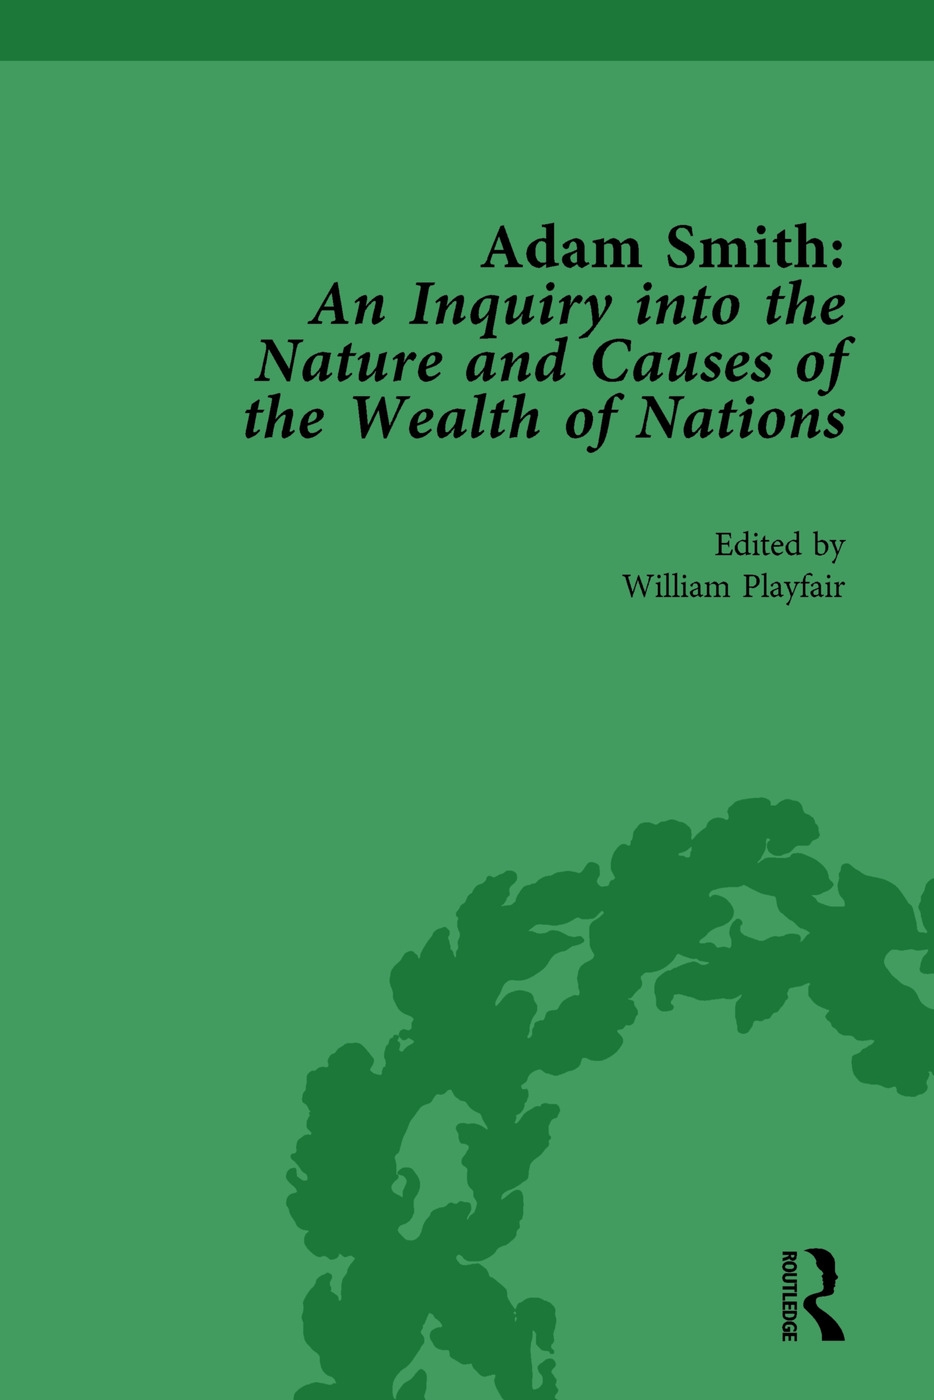 Adam Smith: An Inquiry Into the Nature and Causes of the Wealth of Nations, Volume II: Edited by William Playfair